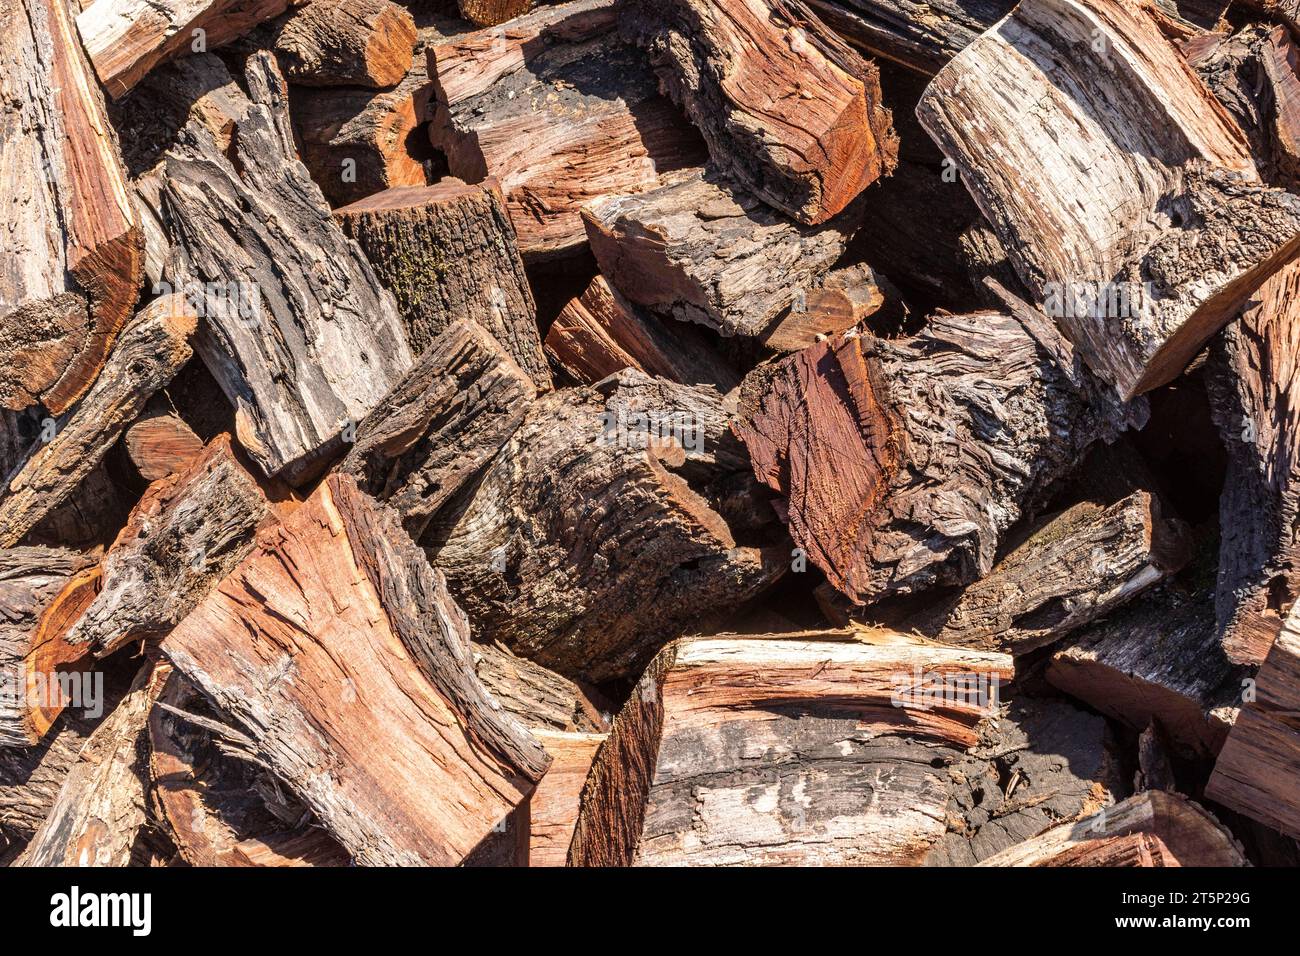 Wood chips with bark outdoors Stock Photo